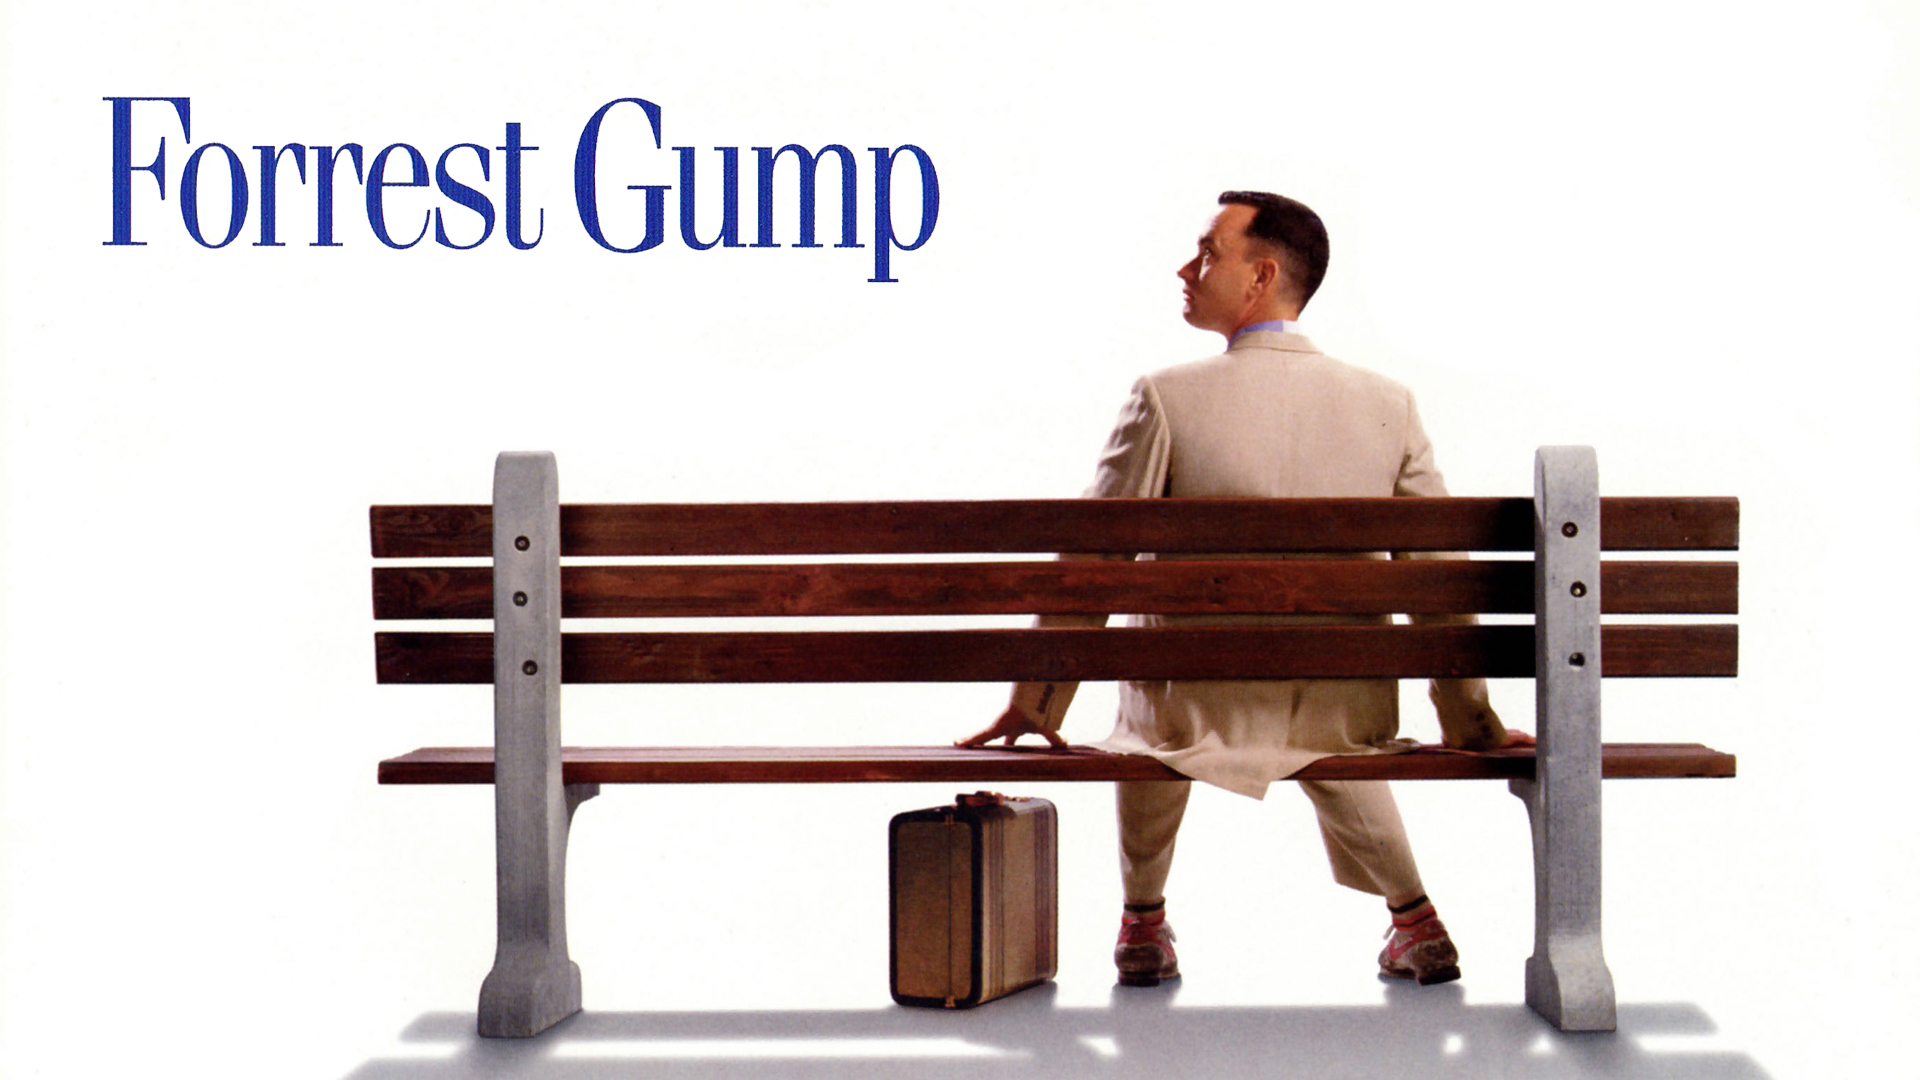 28 Facts You Might Not Know About The Forrest Gump Movie